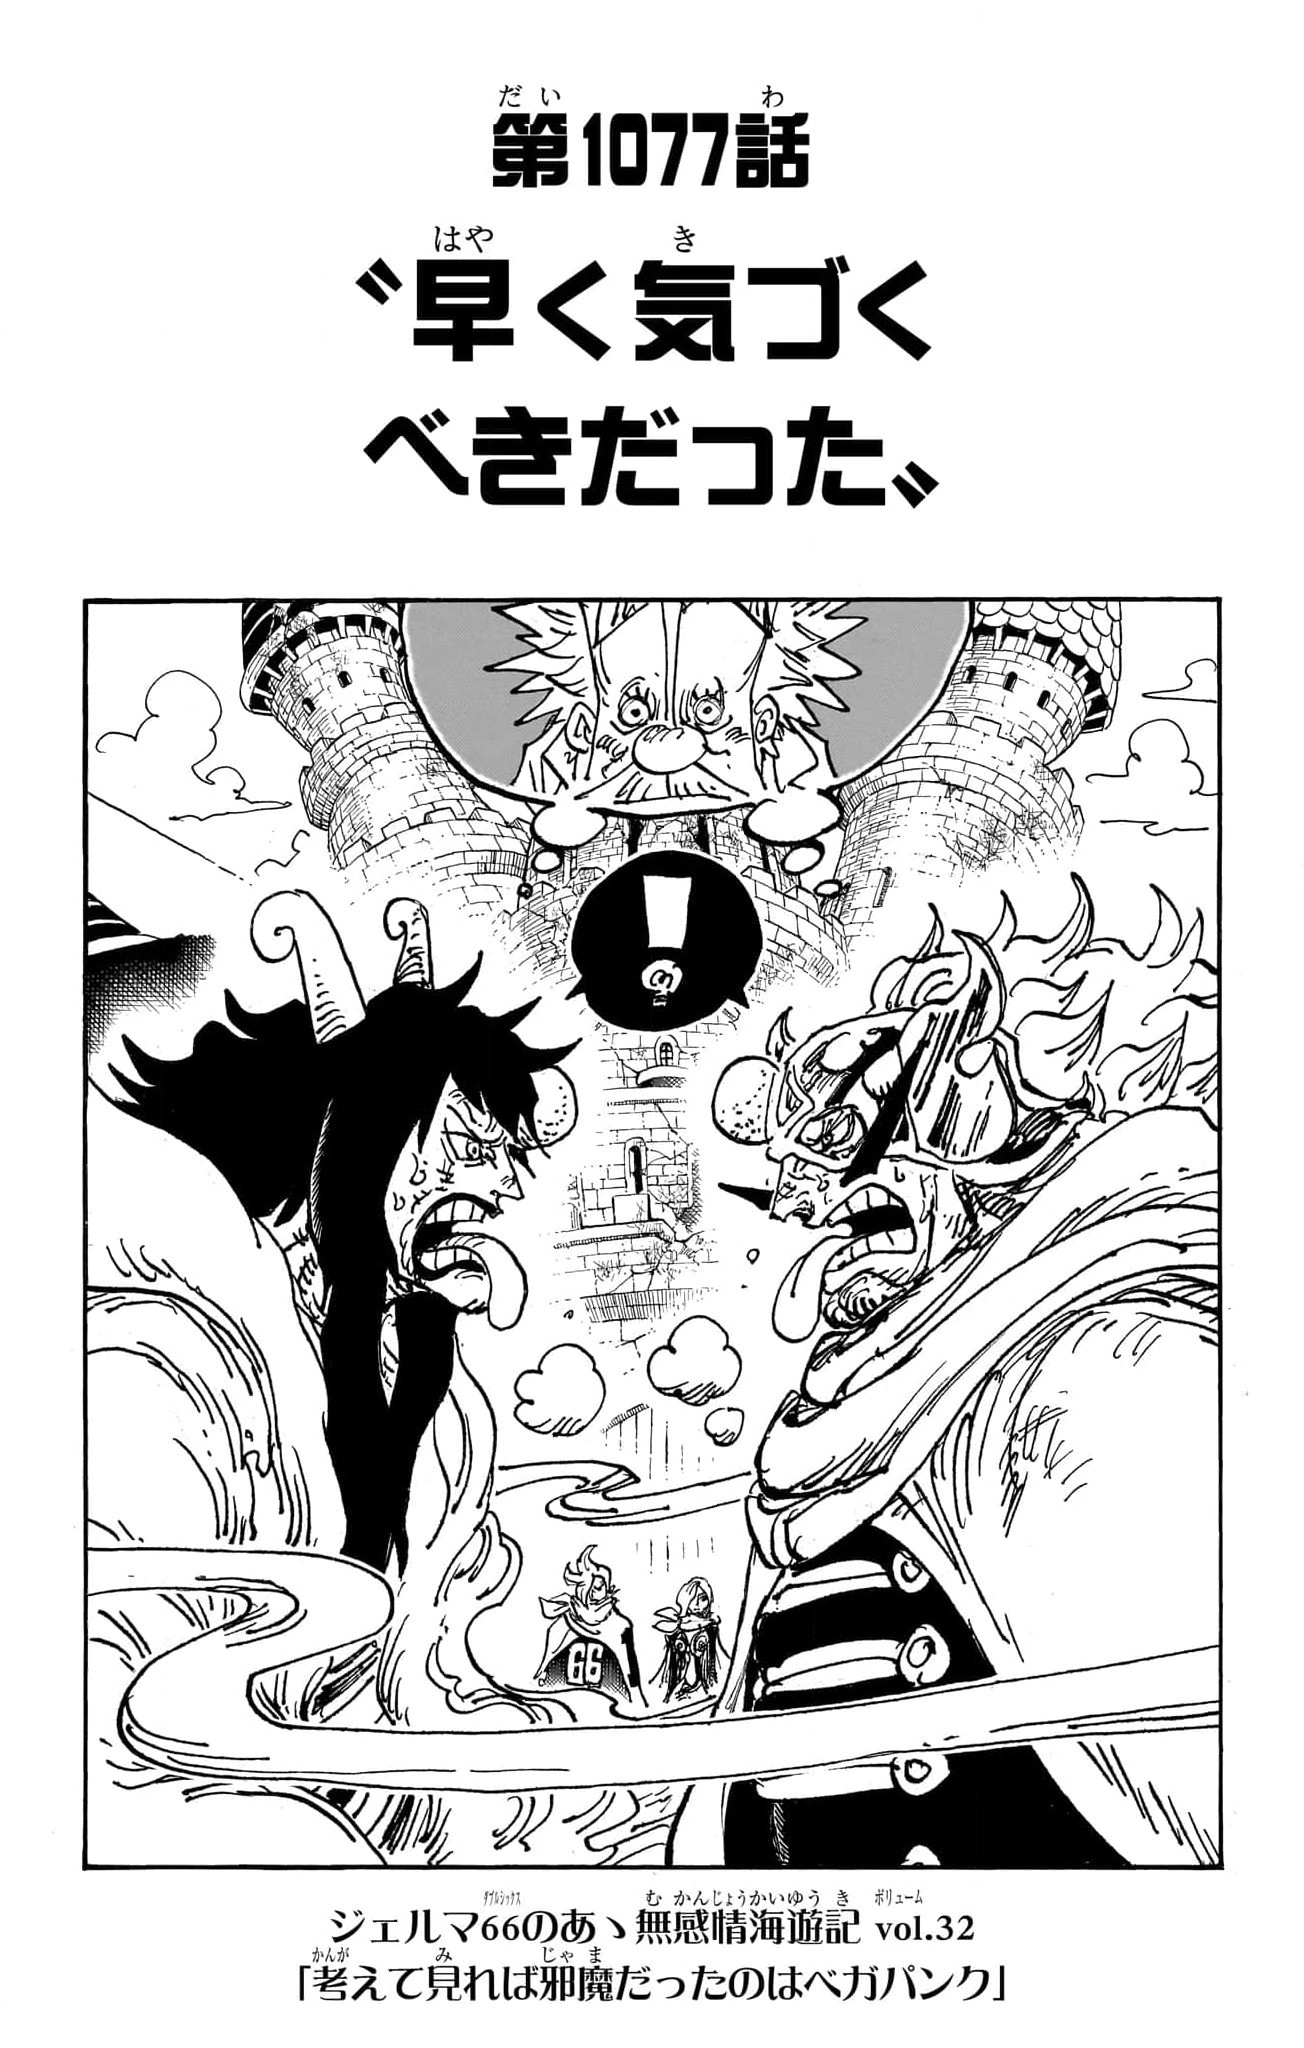 One Piece 1080 Spoilers Twitter